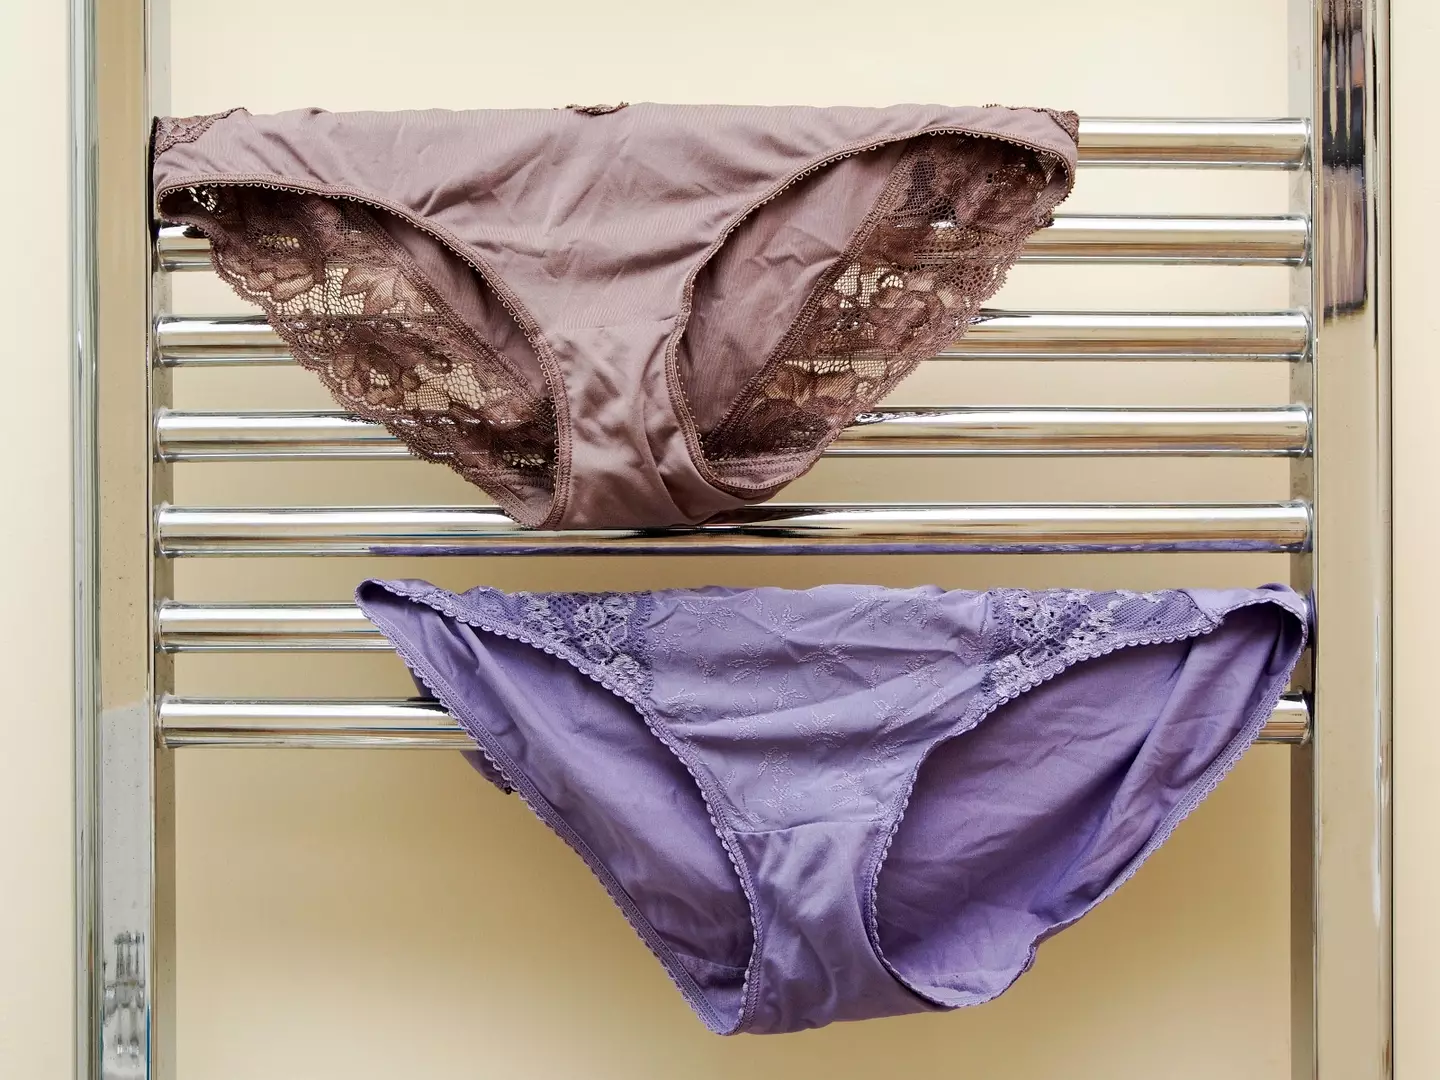 The woman explained that some underwear was specifically for her period.